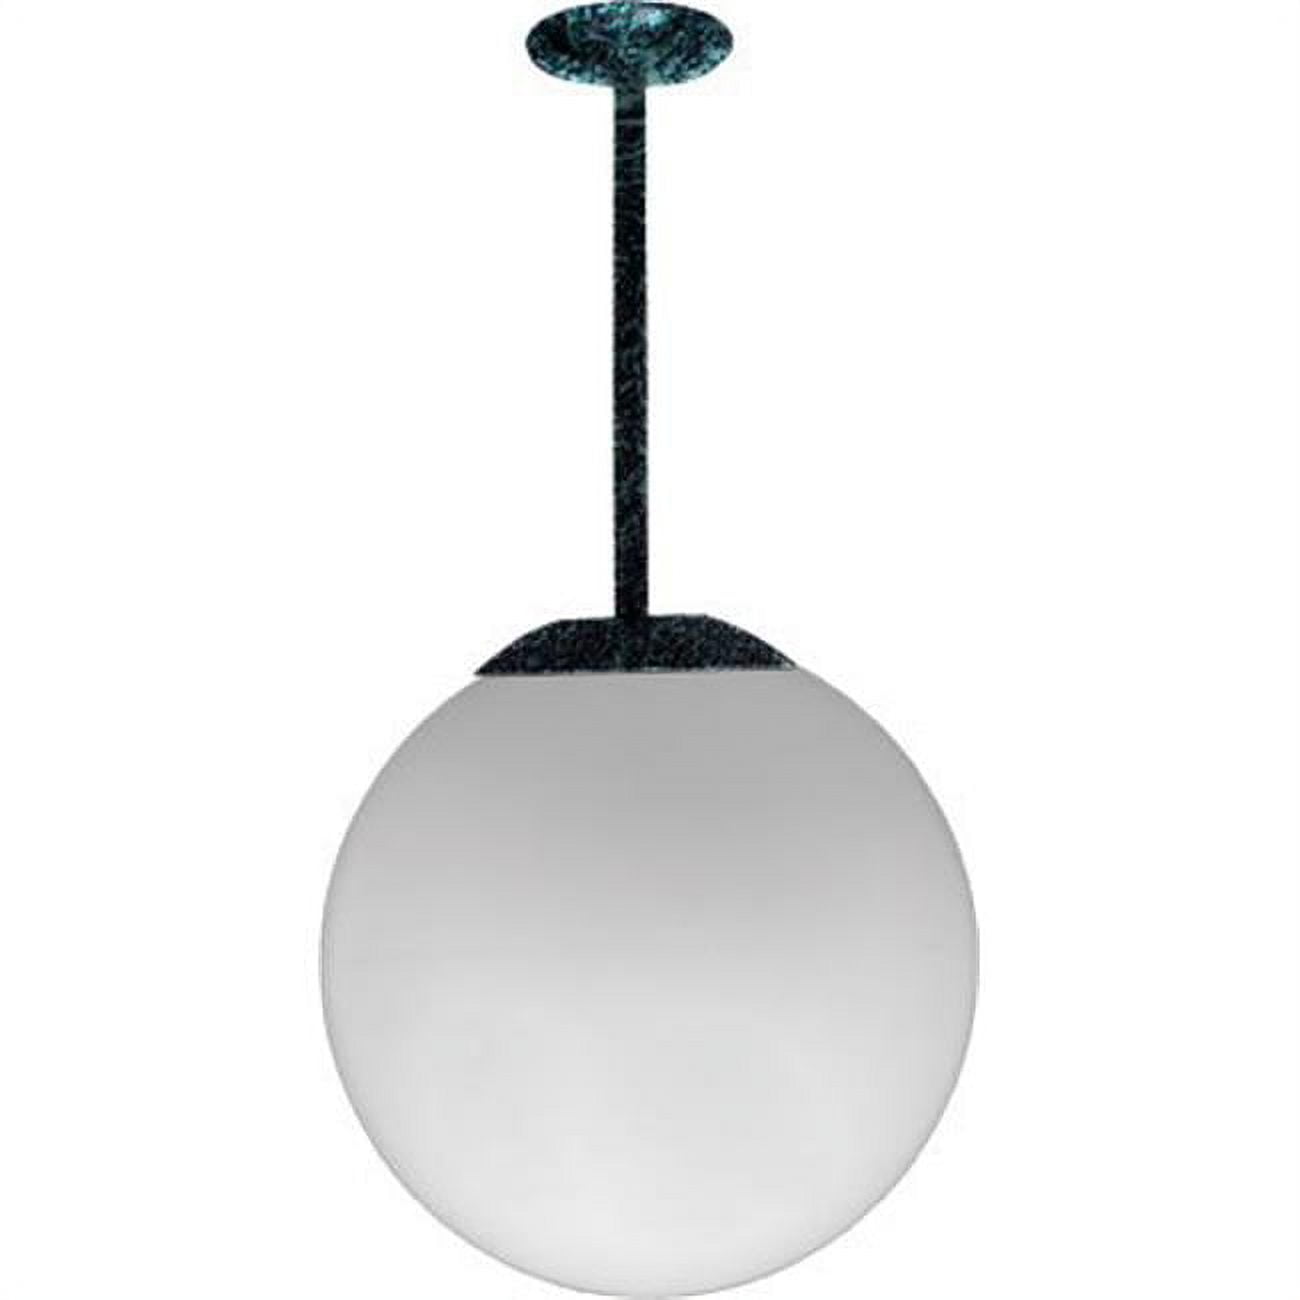 D7514-12-vg 18 In. 120 V 50 Watts Ceiling Globe Fixture 12 In. Drop With High Pressure Sodium Lamp, Verde Green